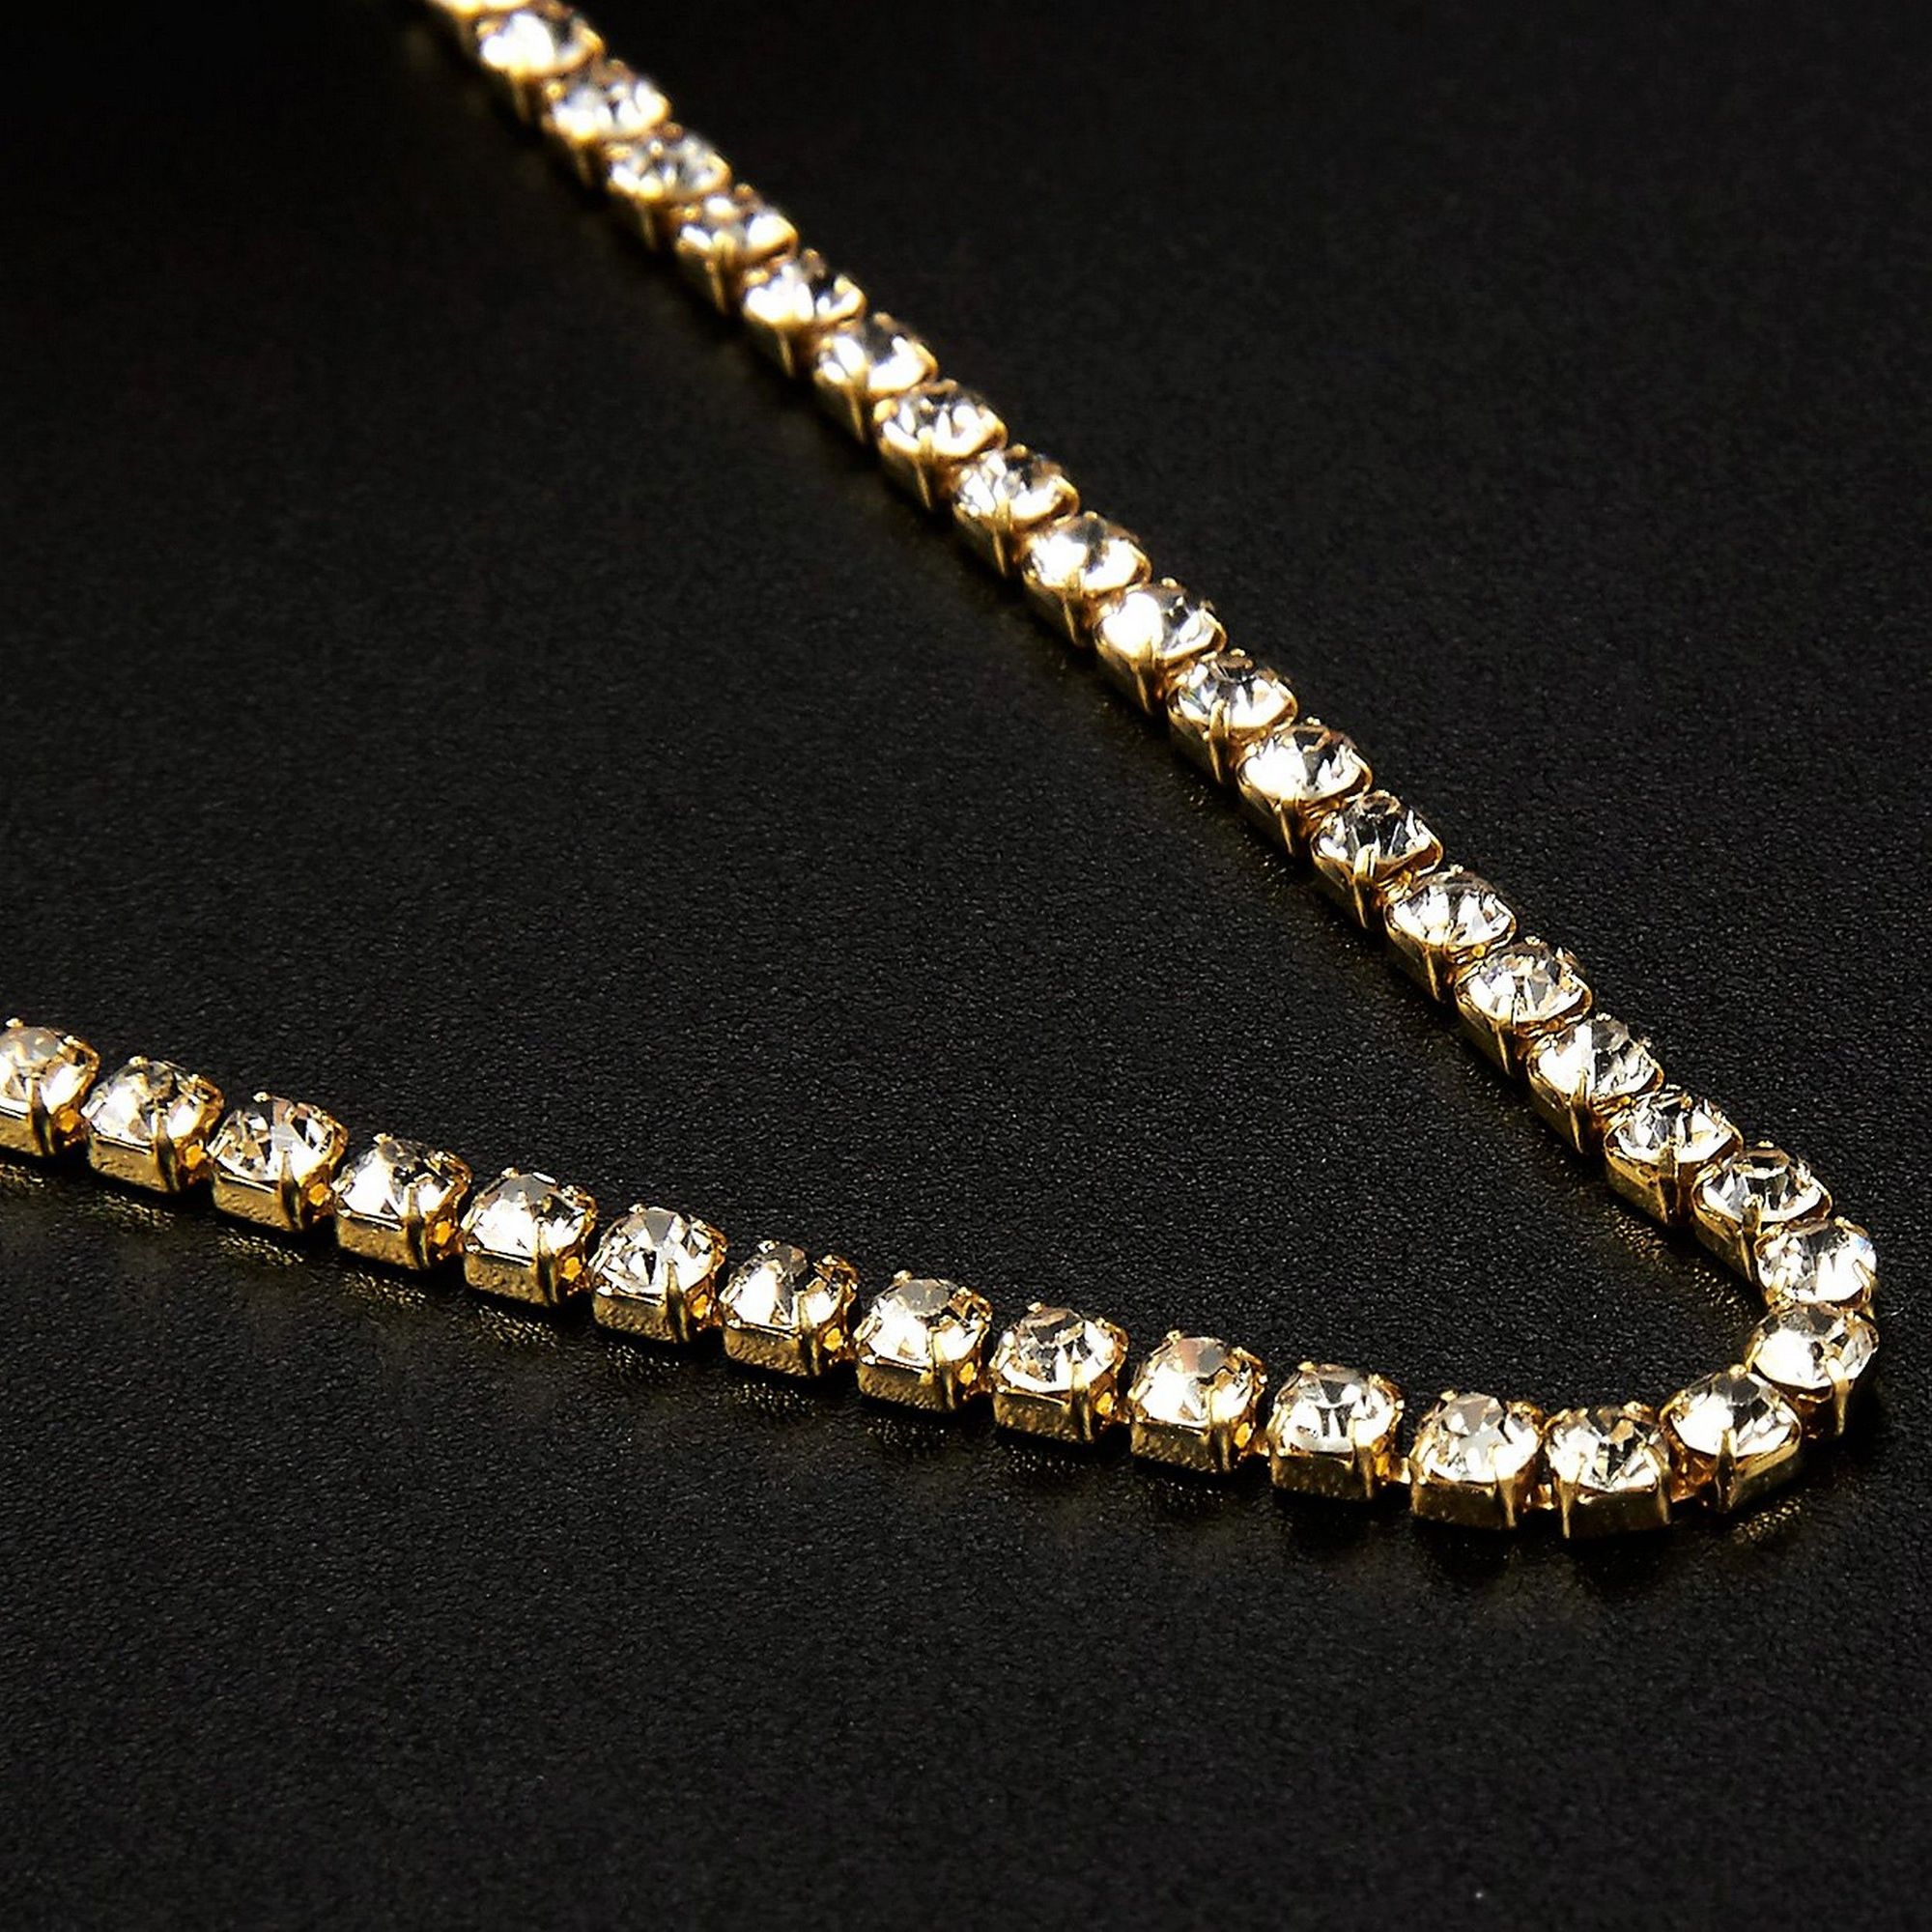 16.4 Yards 2 mm Rhinestone Crystal Close Chain Trim Claw Chain Glass Sew On Rhinestones Cup Chain for Sewing Jewelry Craft DIY Decorative Silver Bottom SS6 Clear